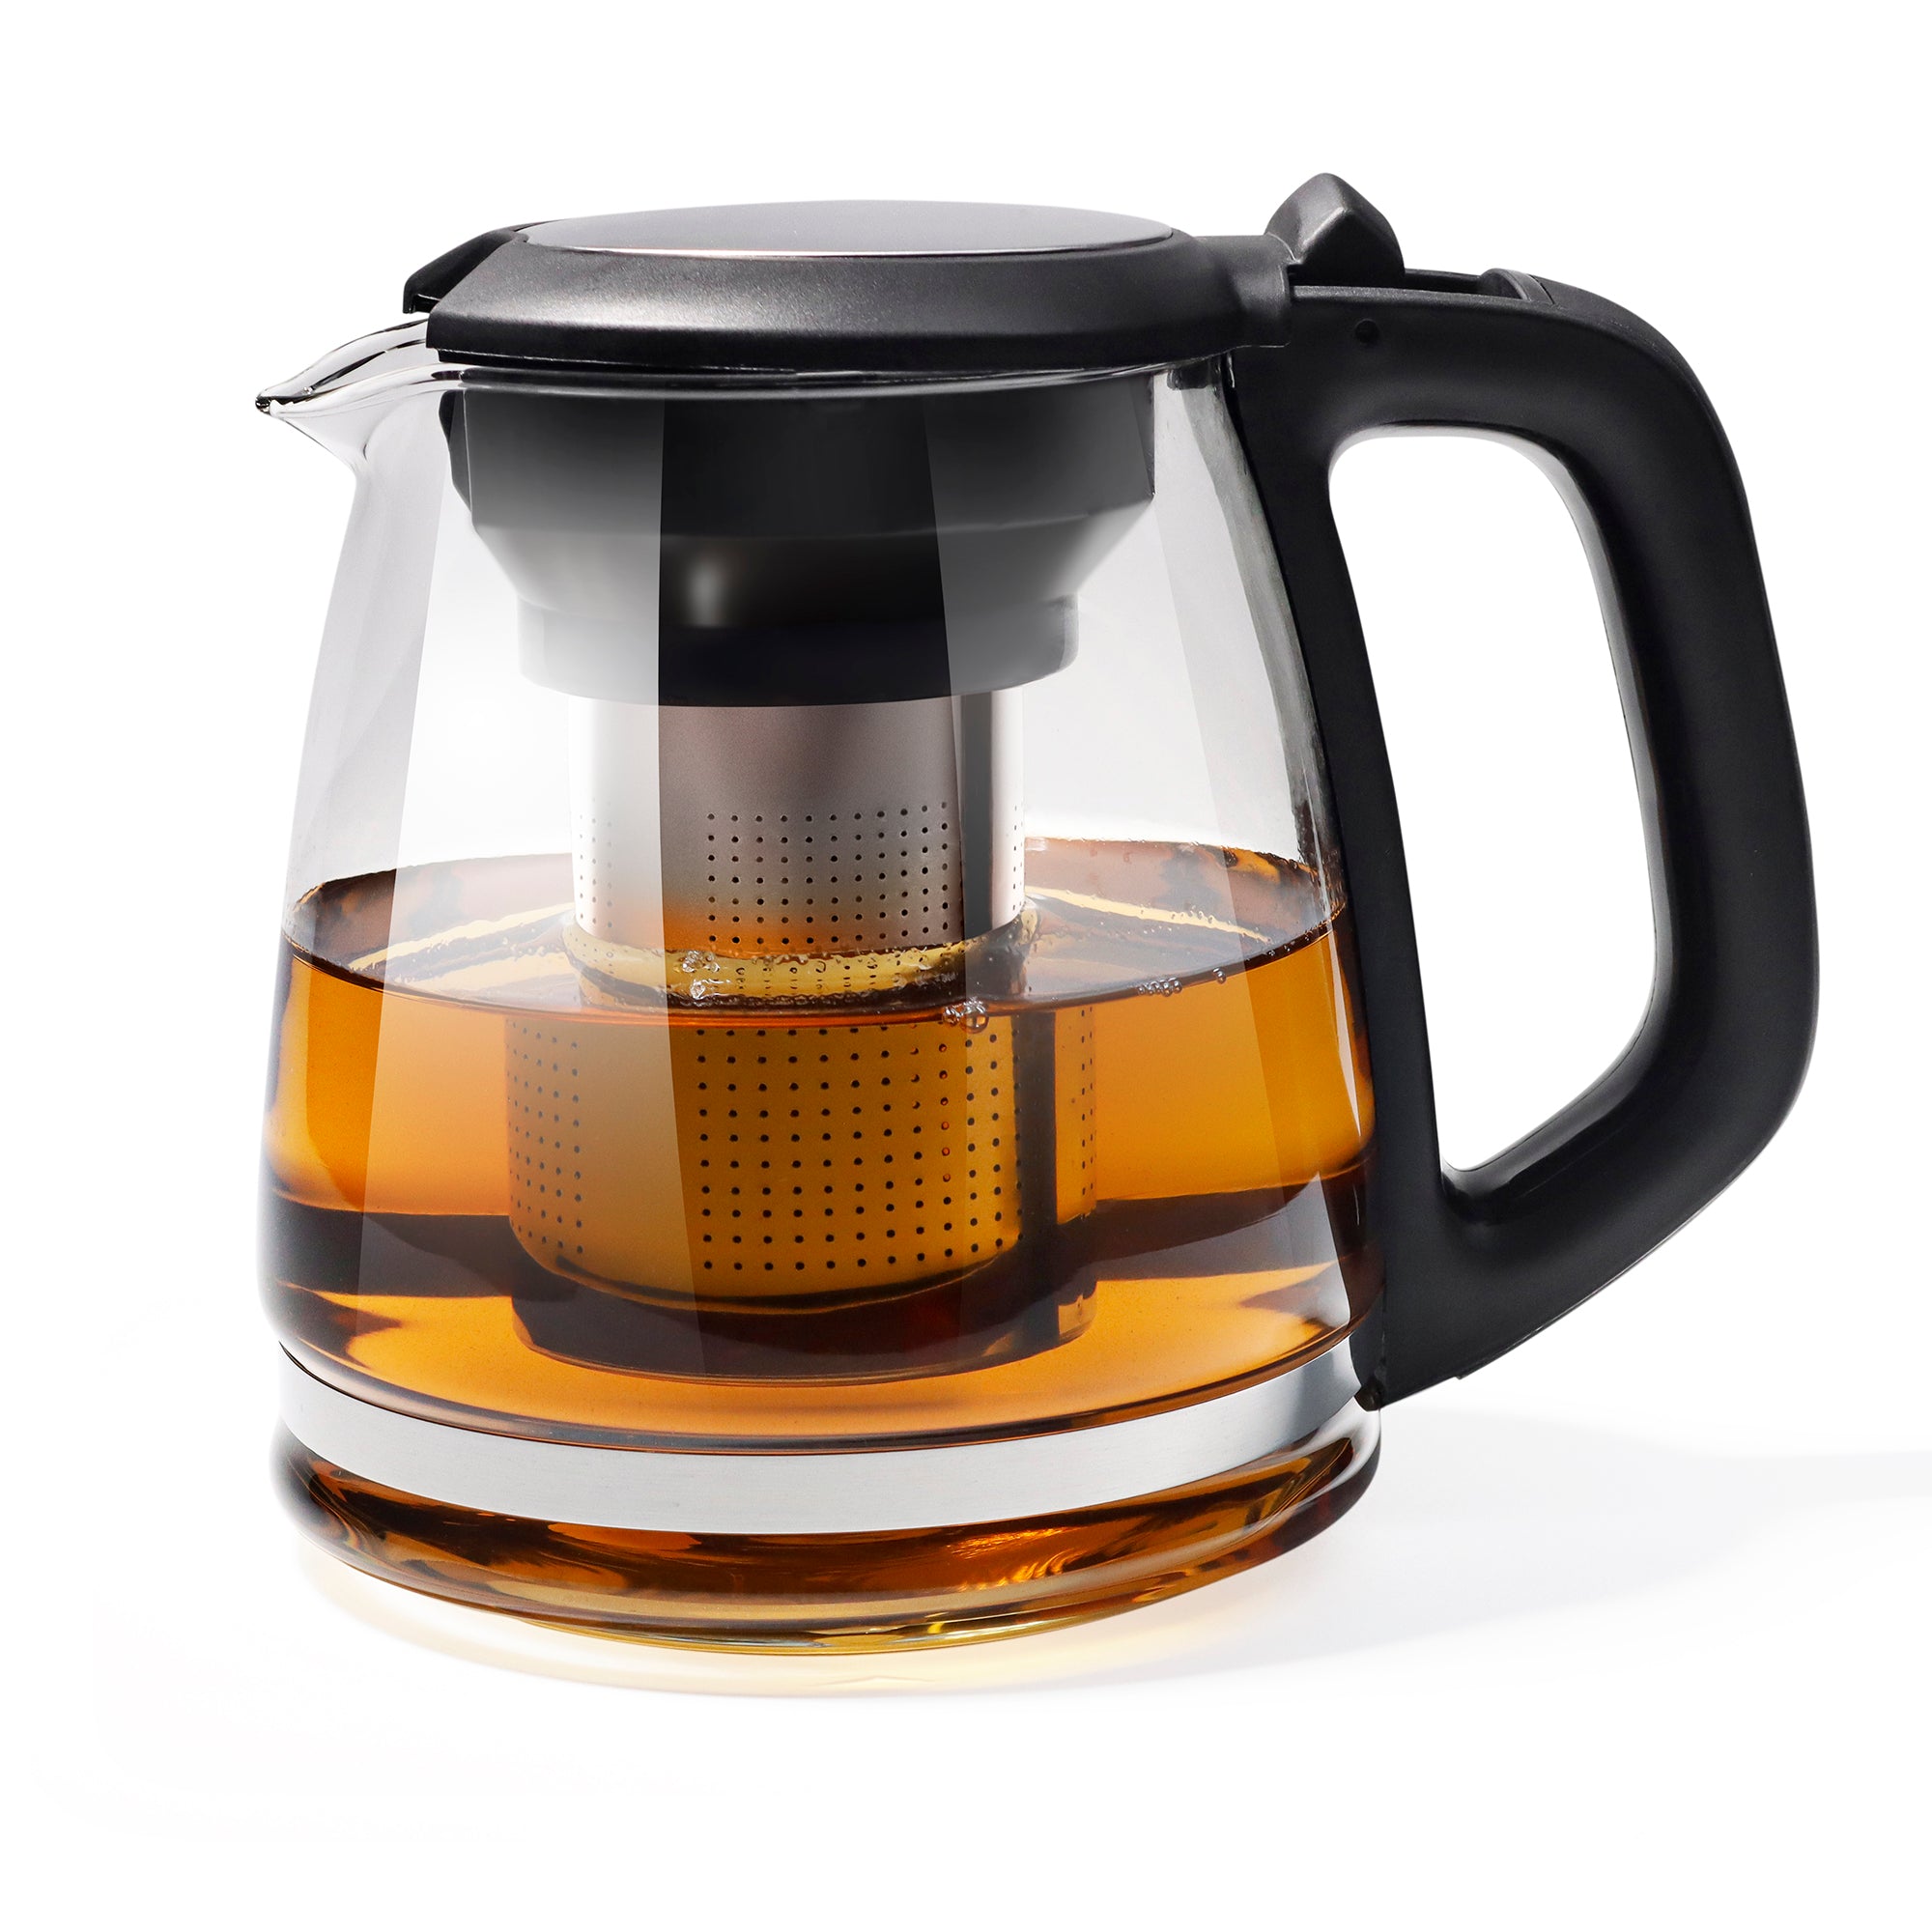 Wirsh Glass Teapot with Removable Stainless Steel Infuser, 50oz/1500ml Clear Borosilicate Glass Tea Kettle